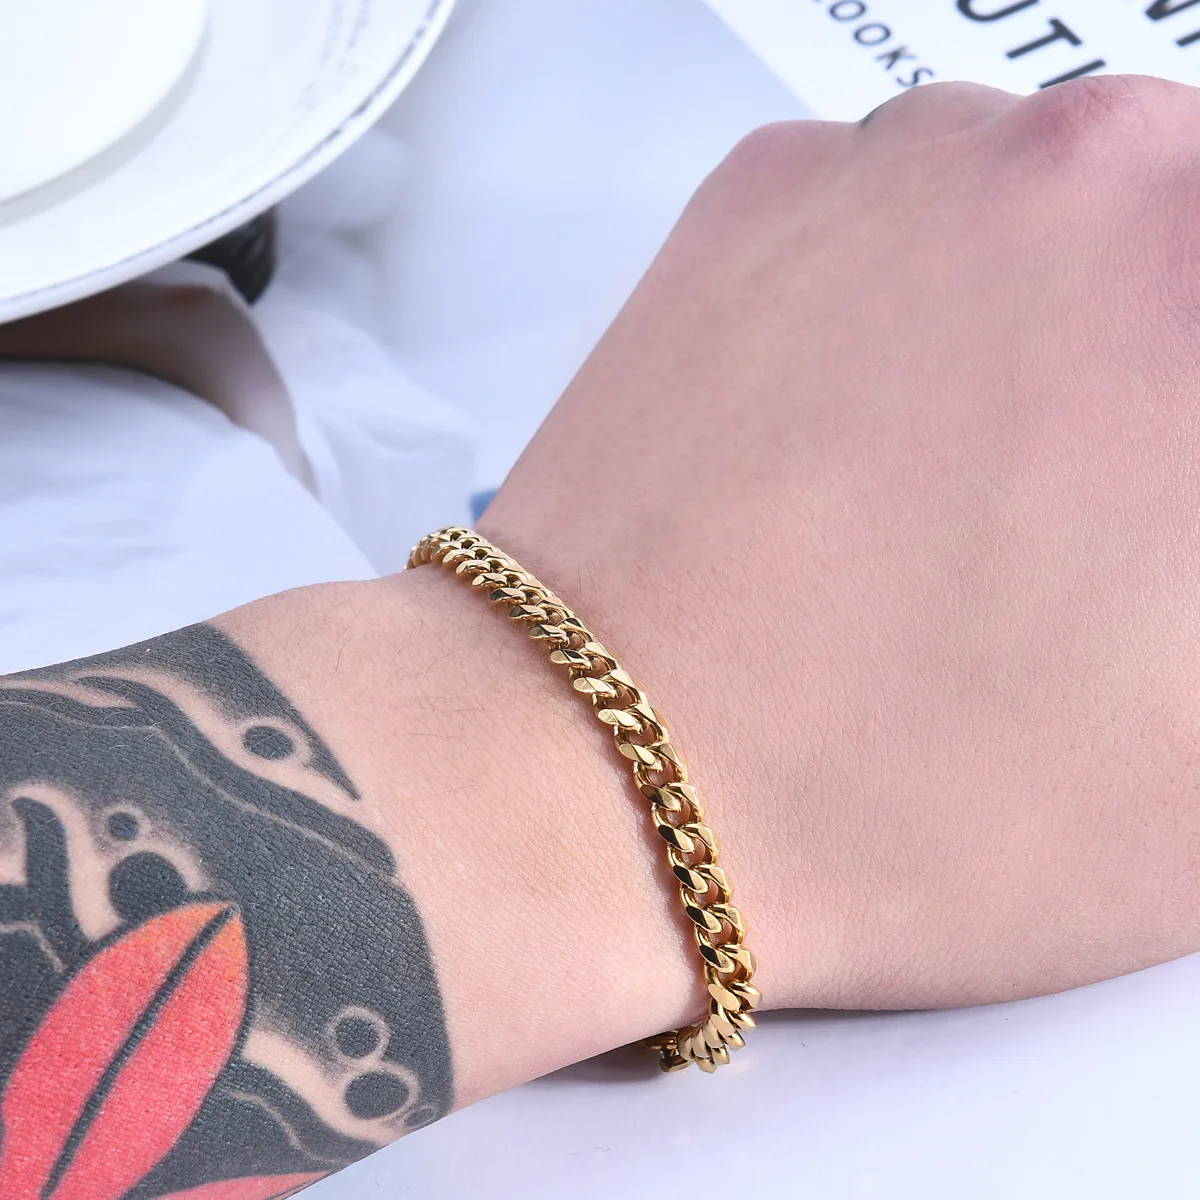 

2021 eBay new hip hop jewelry link chains Gold plated 316 Stainless Steel Cuban bracelet for men, Yellow ,blue ,white,black bead